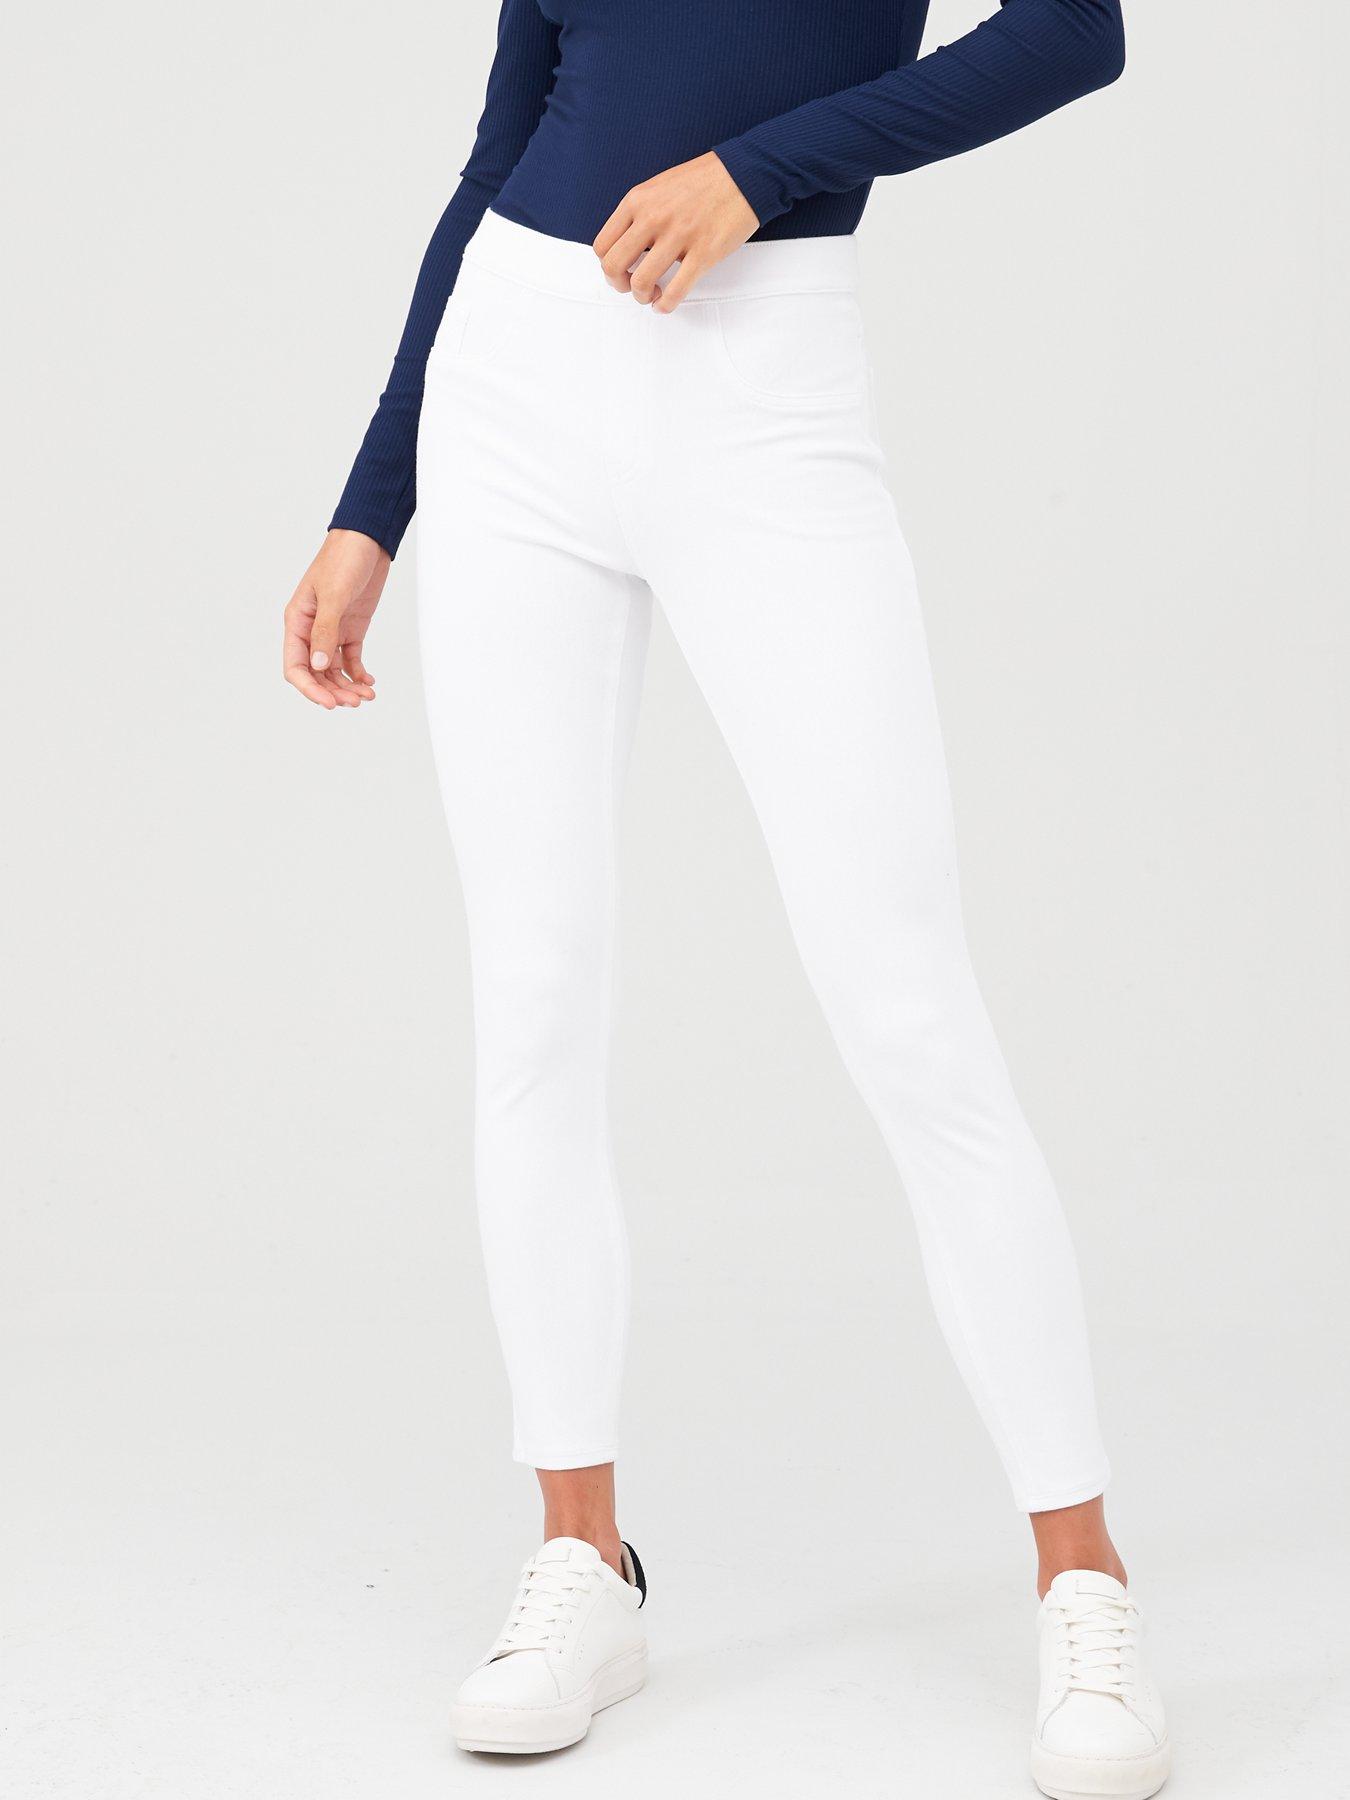 Spanx Jean-ish Ankle Length Slimming Cotton Stretch Leggings Pants Solid  White L Size L - $65 - From Galore